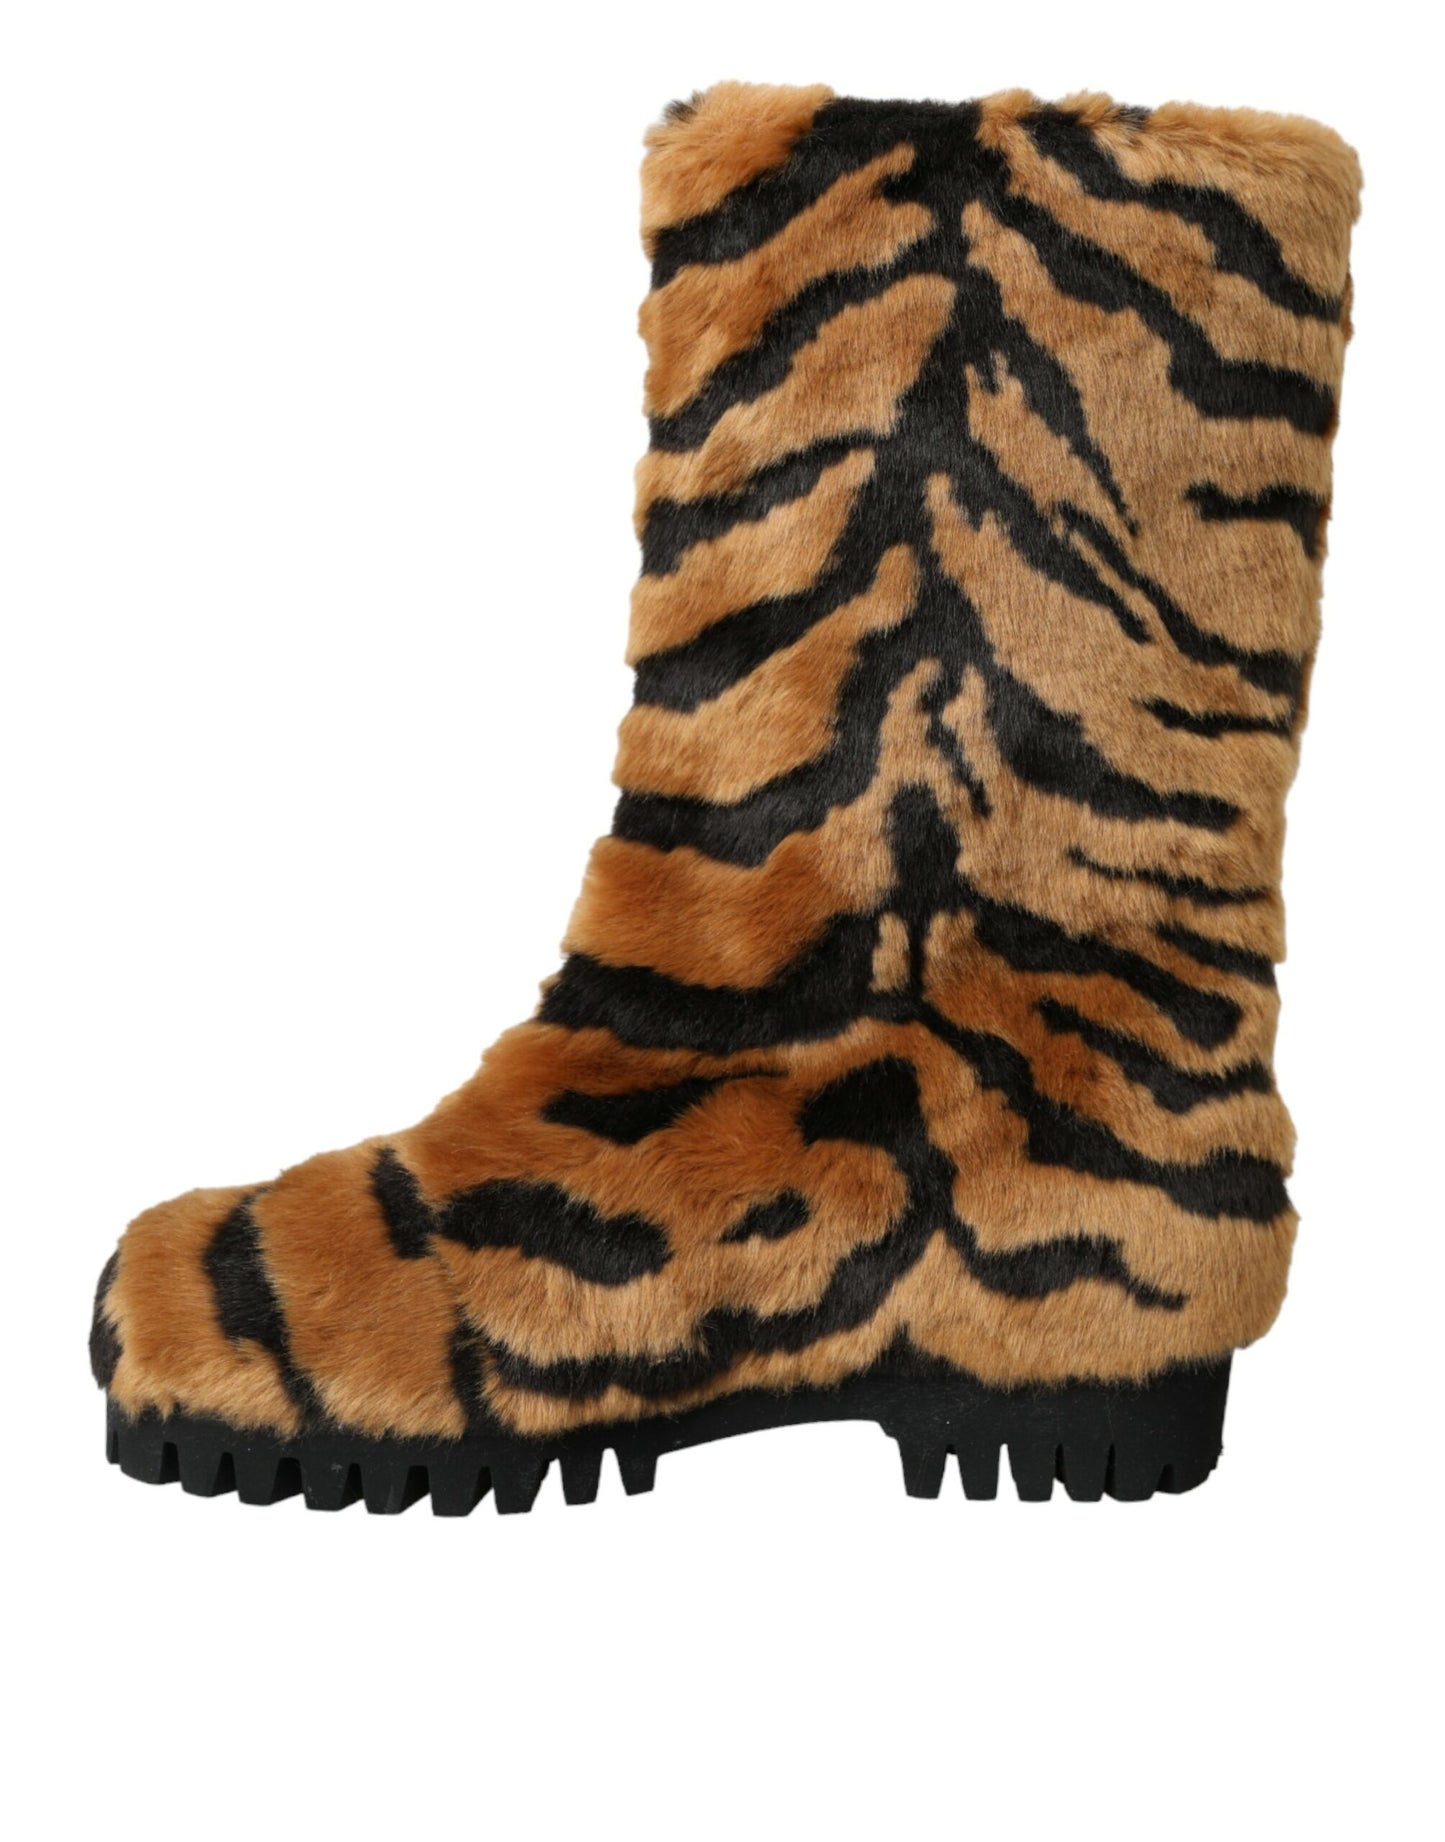 Brown Tiger Fur Leather Mid Calf Boots Shoes